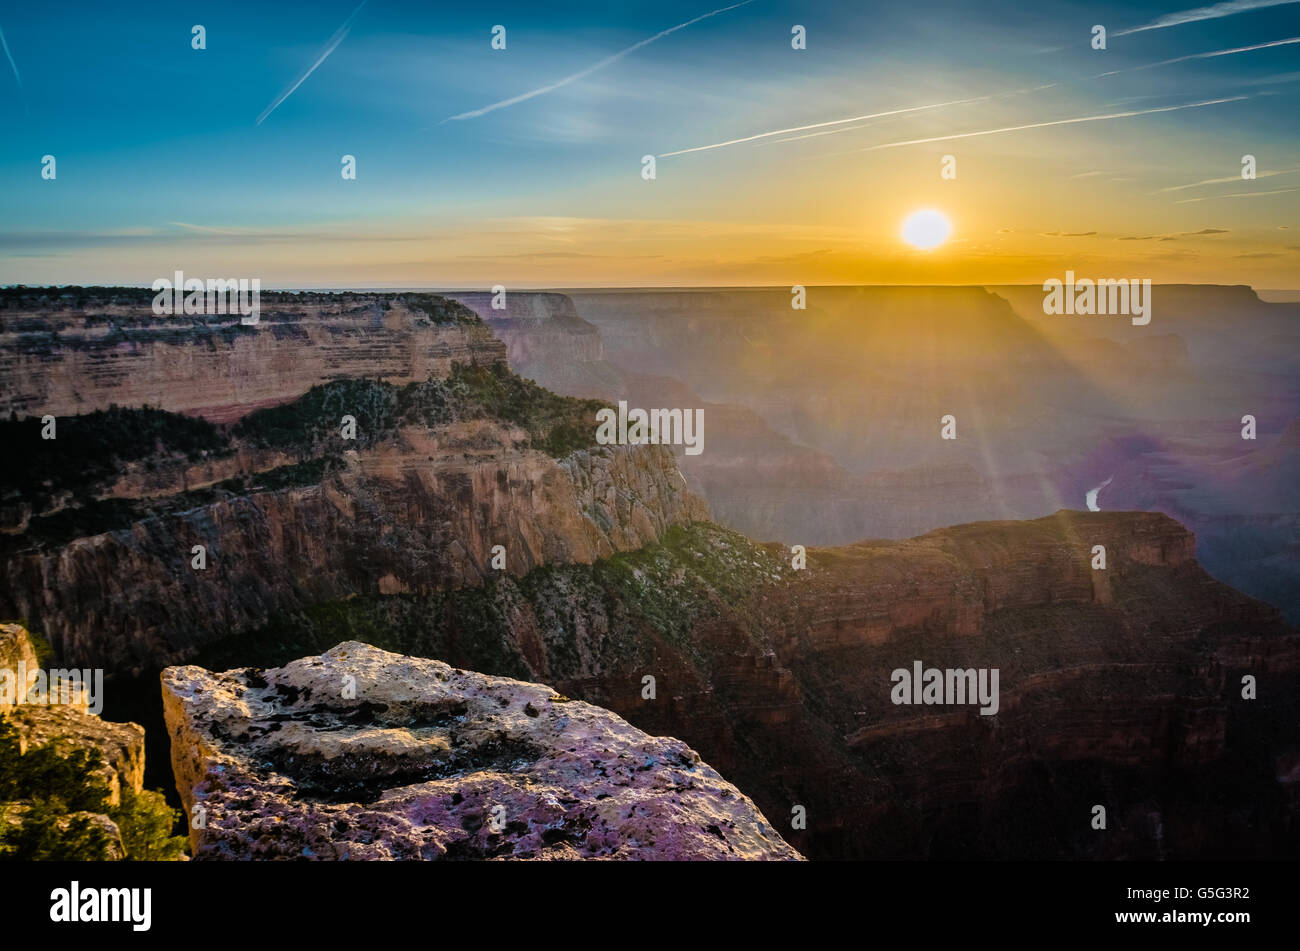 Overview of the Grand Canyon National Park, Arizona Stock Photo